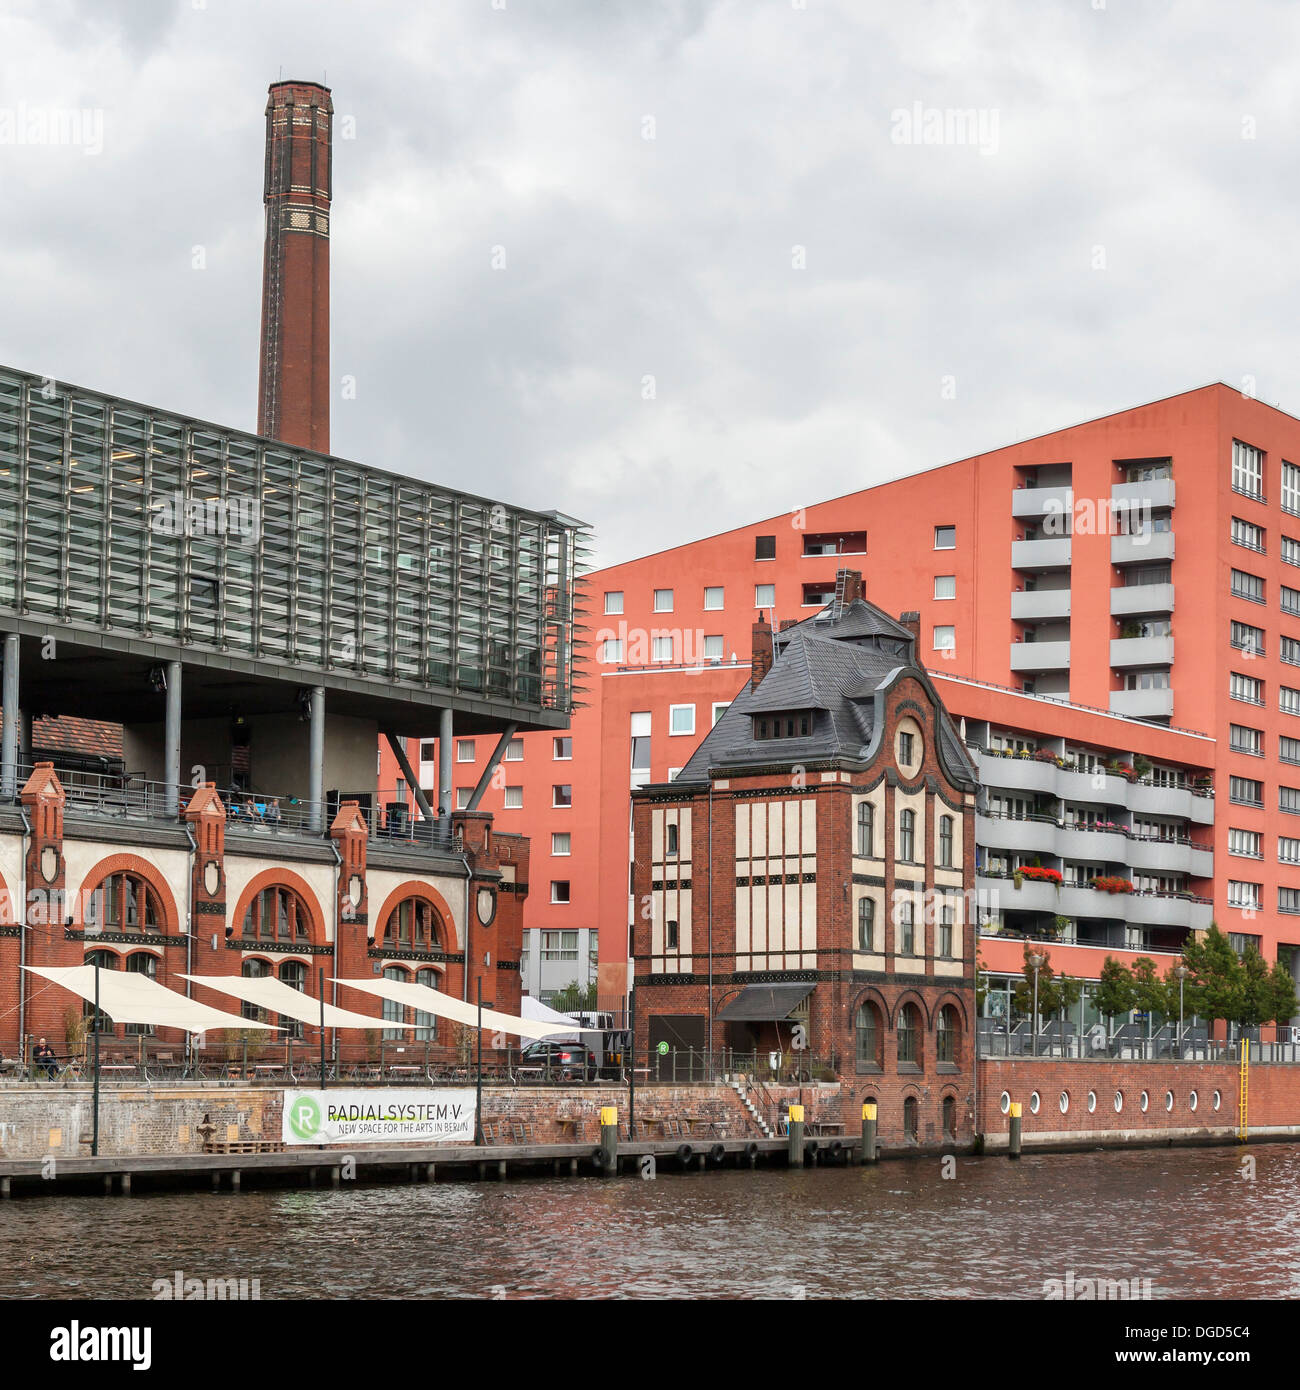 Gentrification - Radialsystem V - music, art, entertainment and conference centre in an old pumping station, river Spree, Berlin Stock Photo